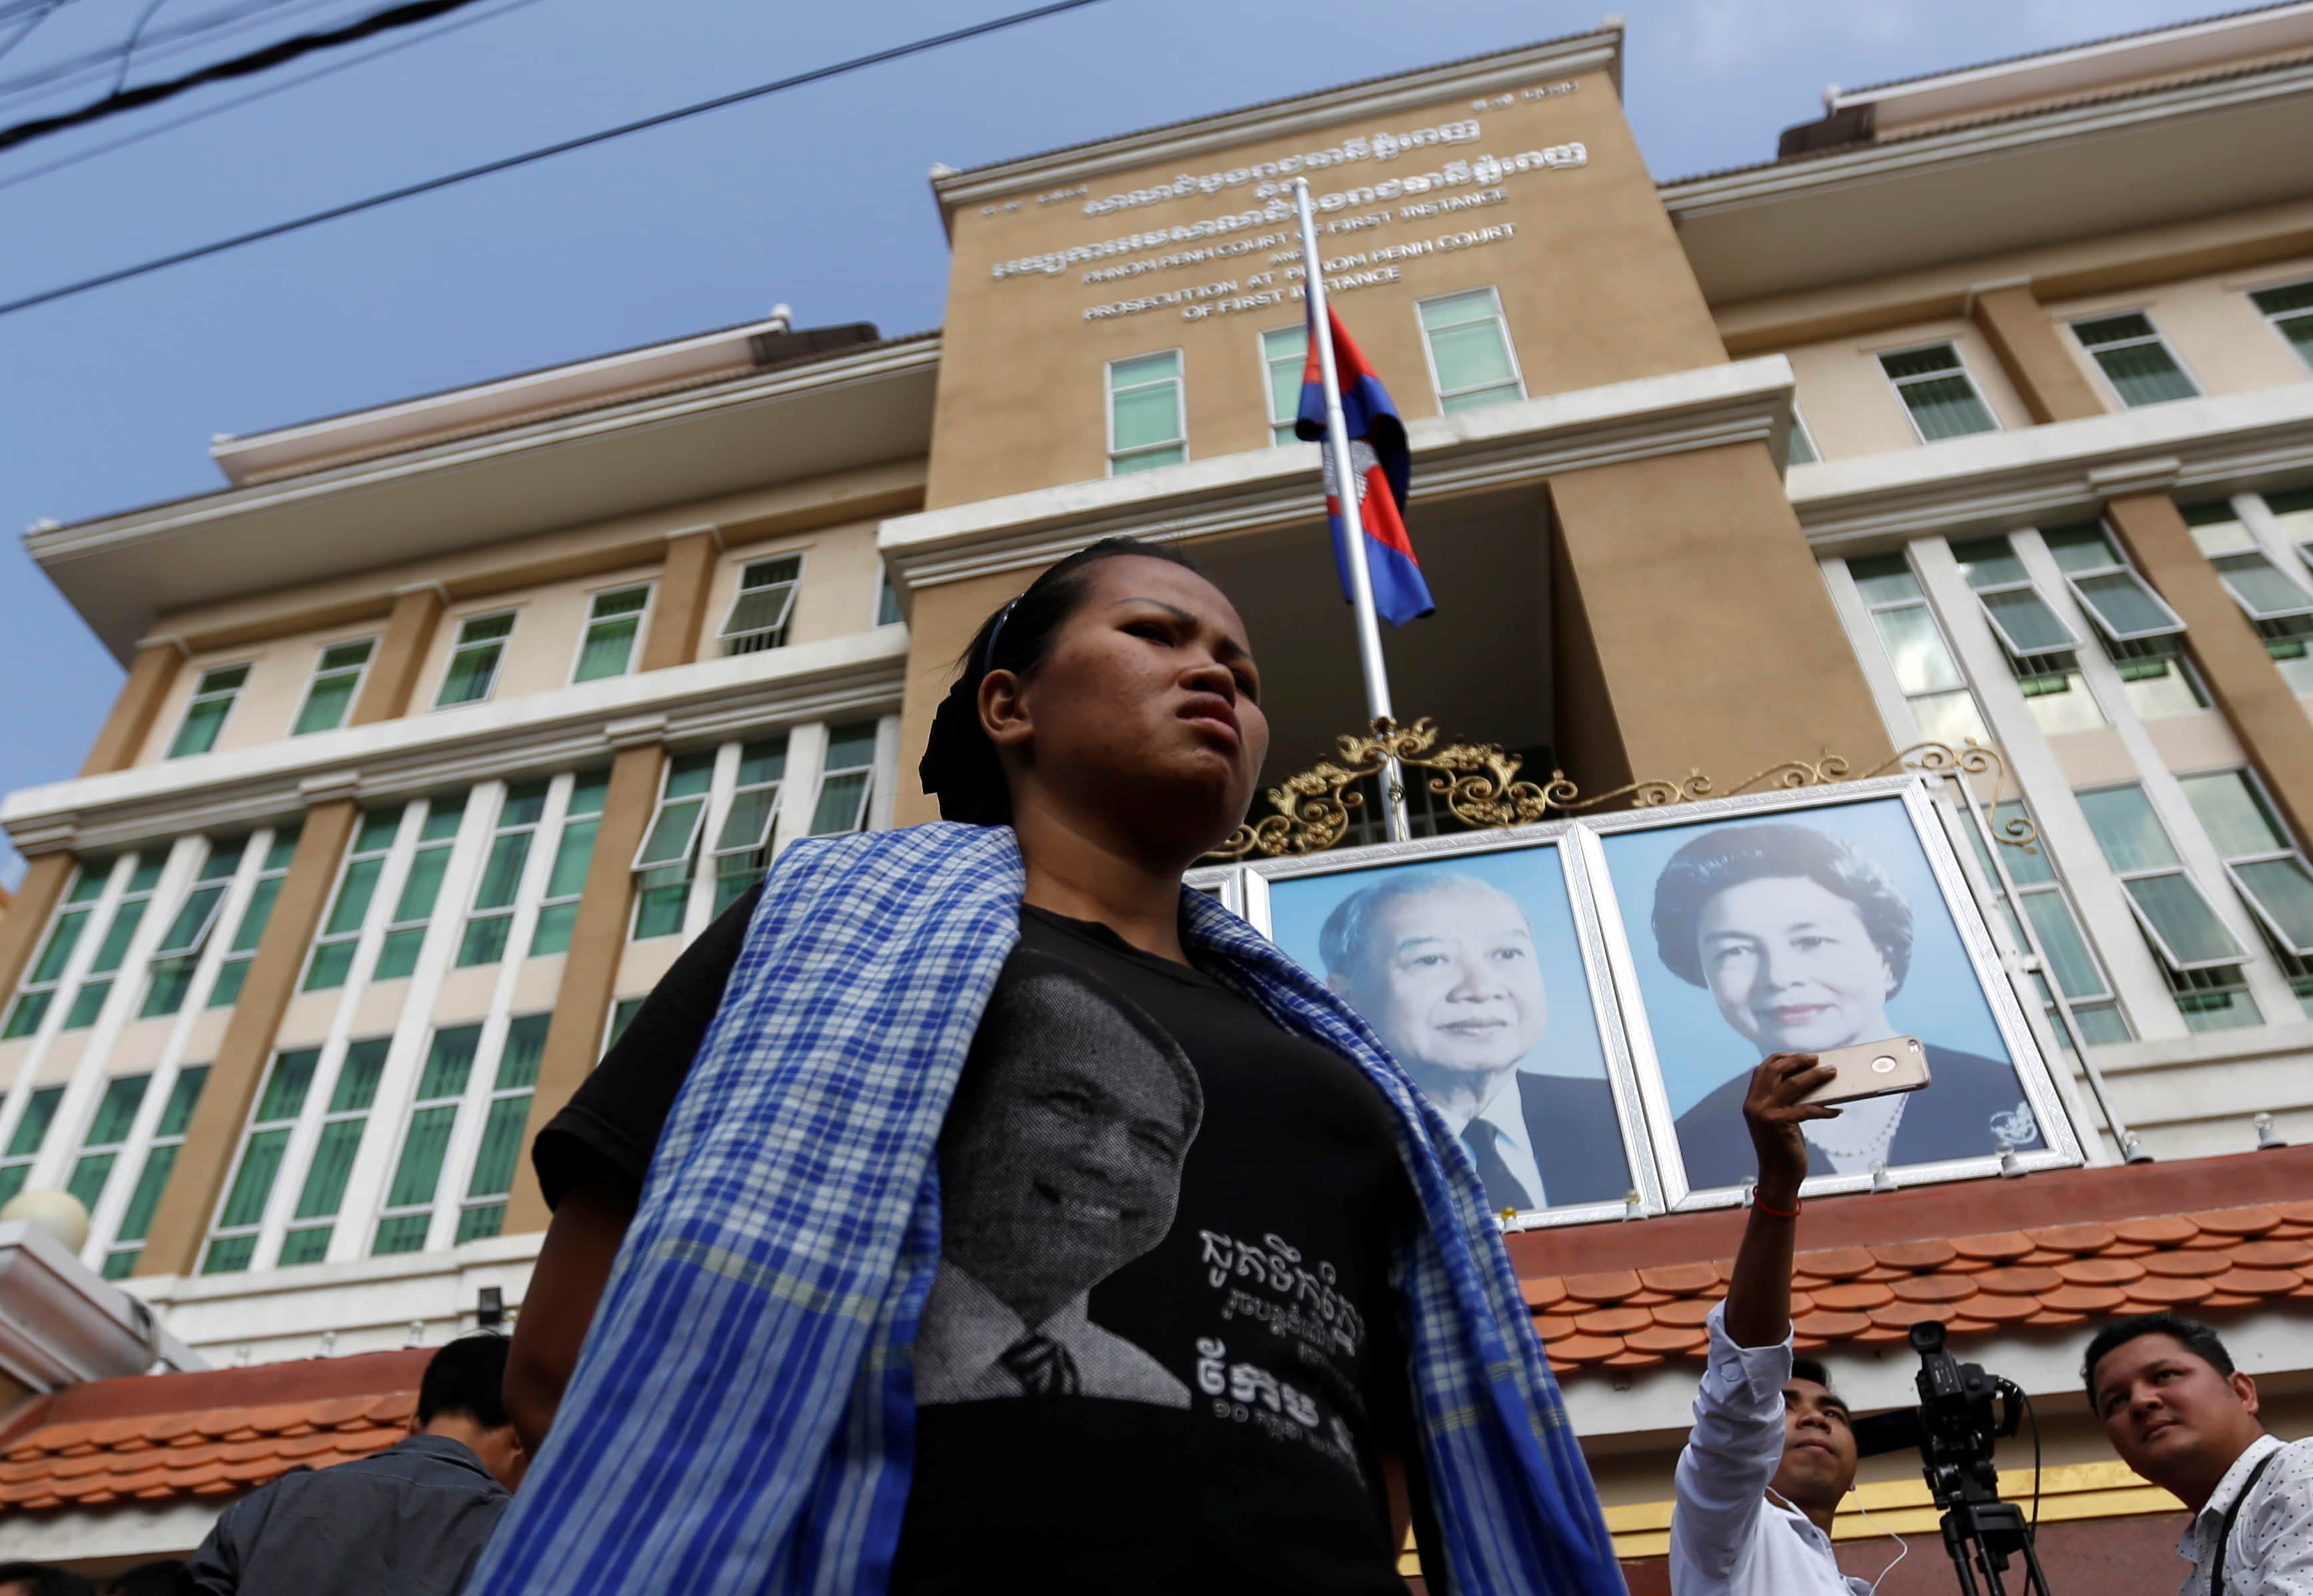 A grassroots supporter of the late Kem Ley stands outside the court building in Phnom Penh, Cambodia on 23 March 2017, REUTERS/Samrang Pring